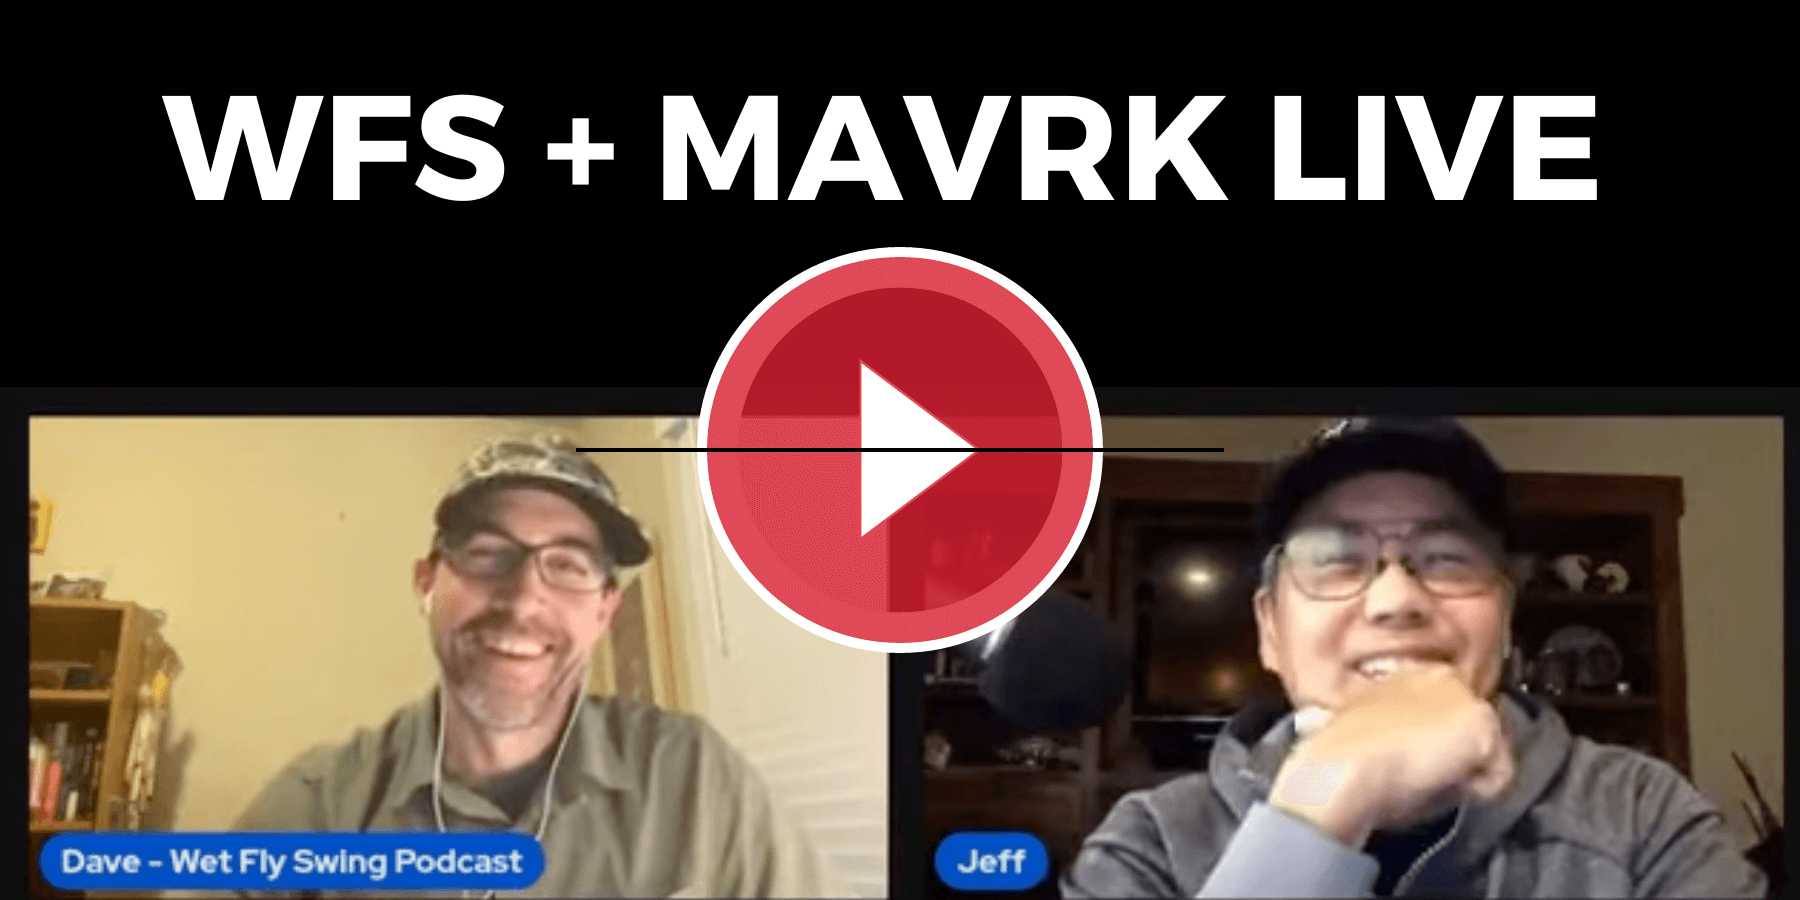 Wet Fly Swing and MAVRK live on Facebook to announce the winner of the Euro School Trip and Gear giveaway